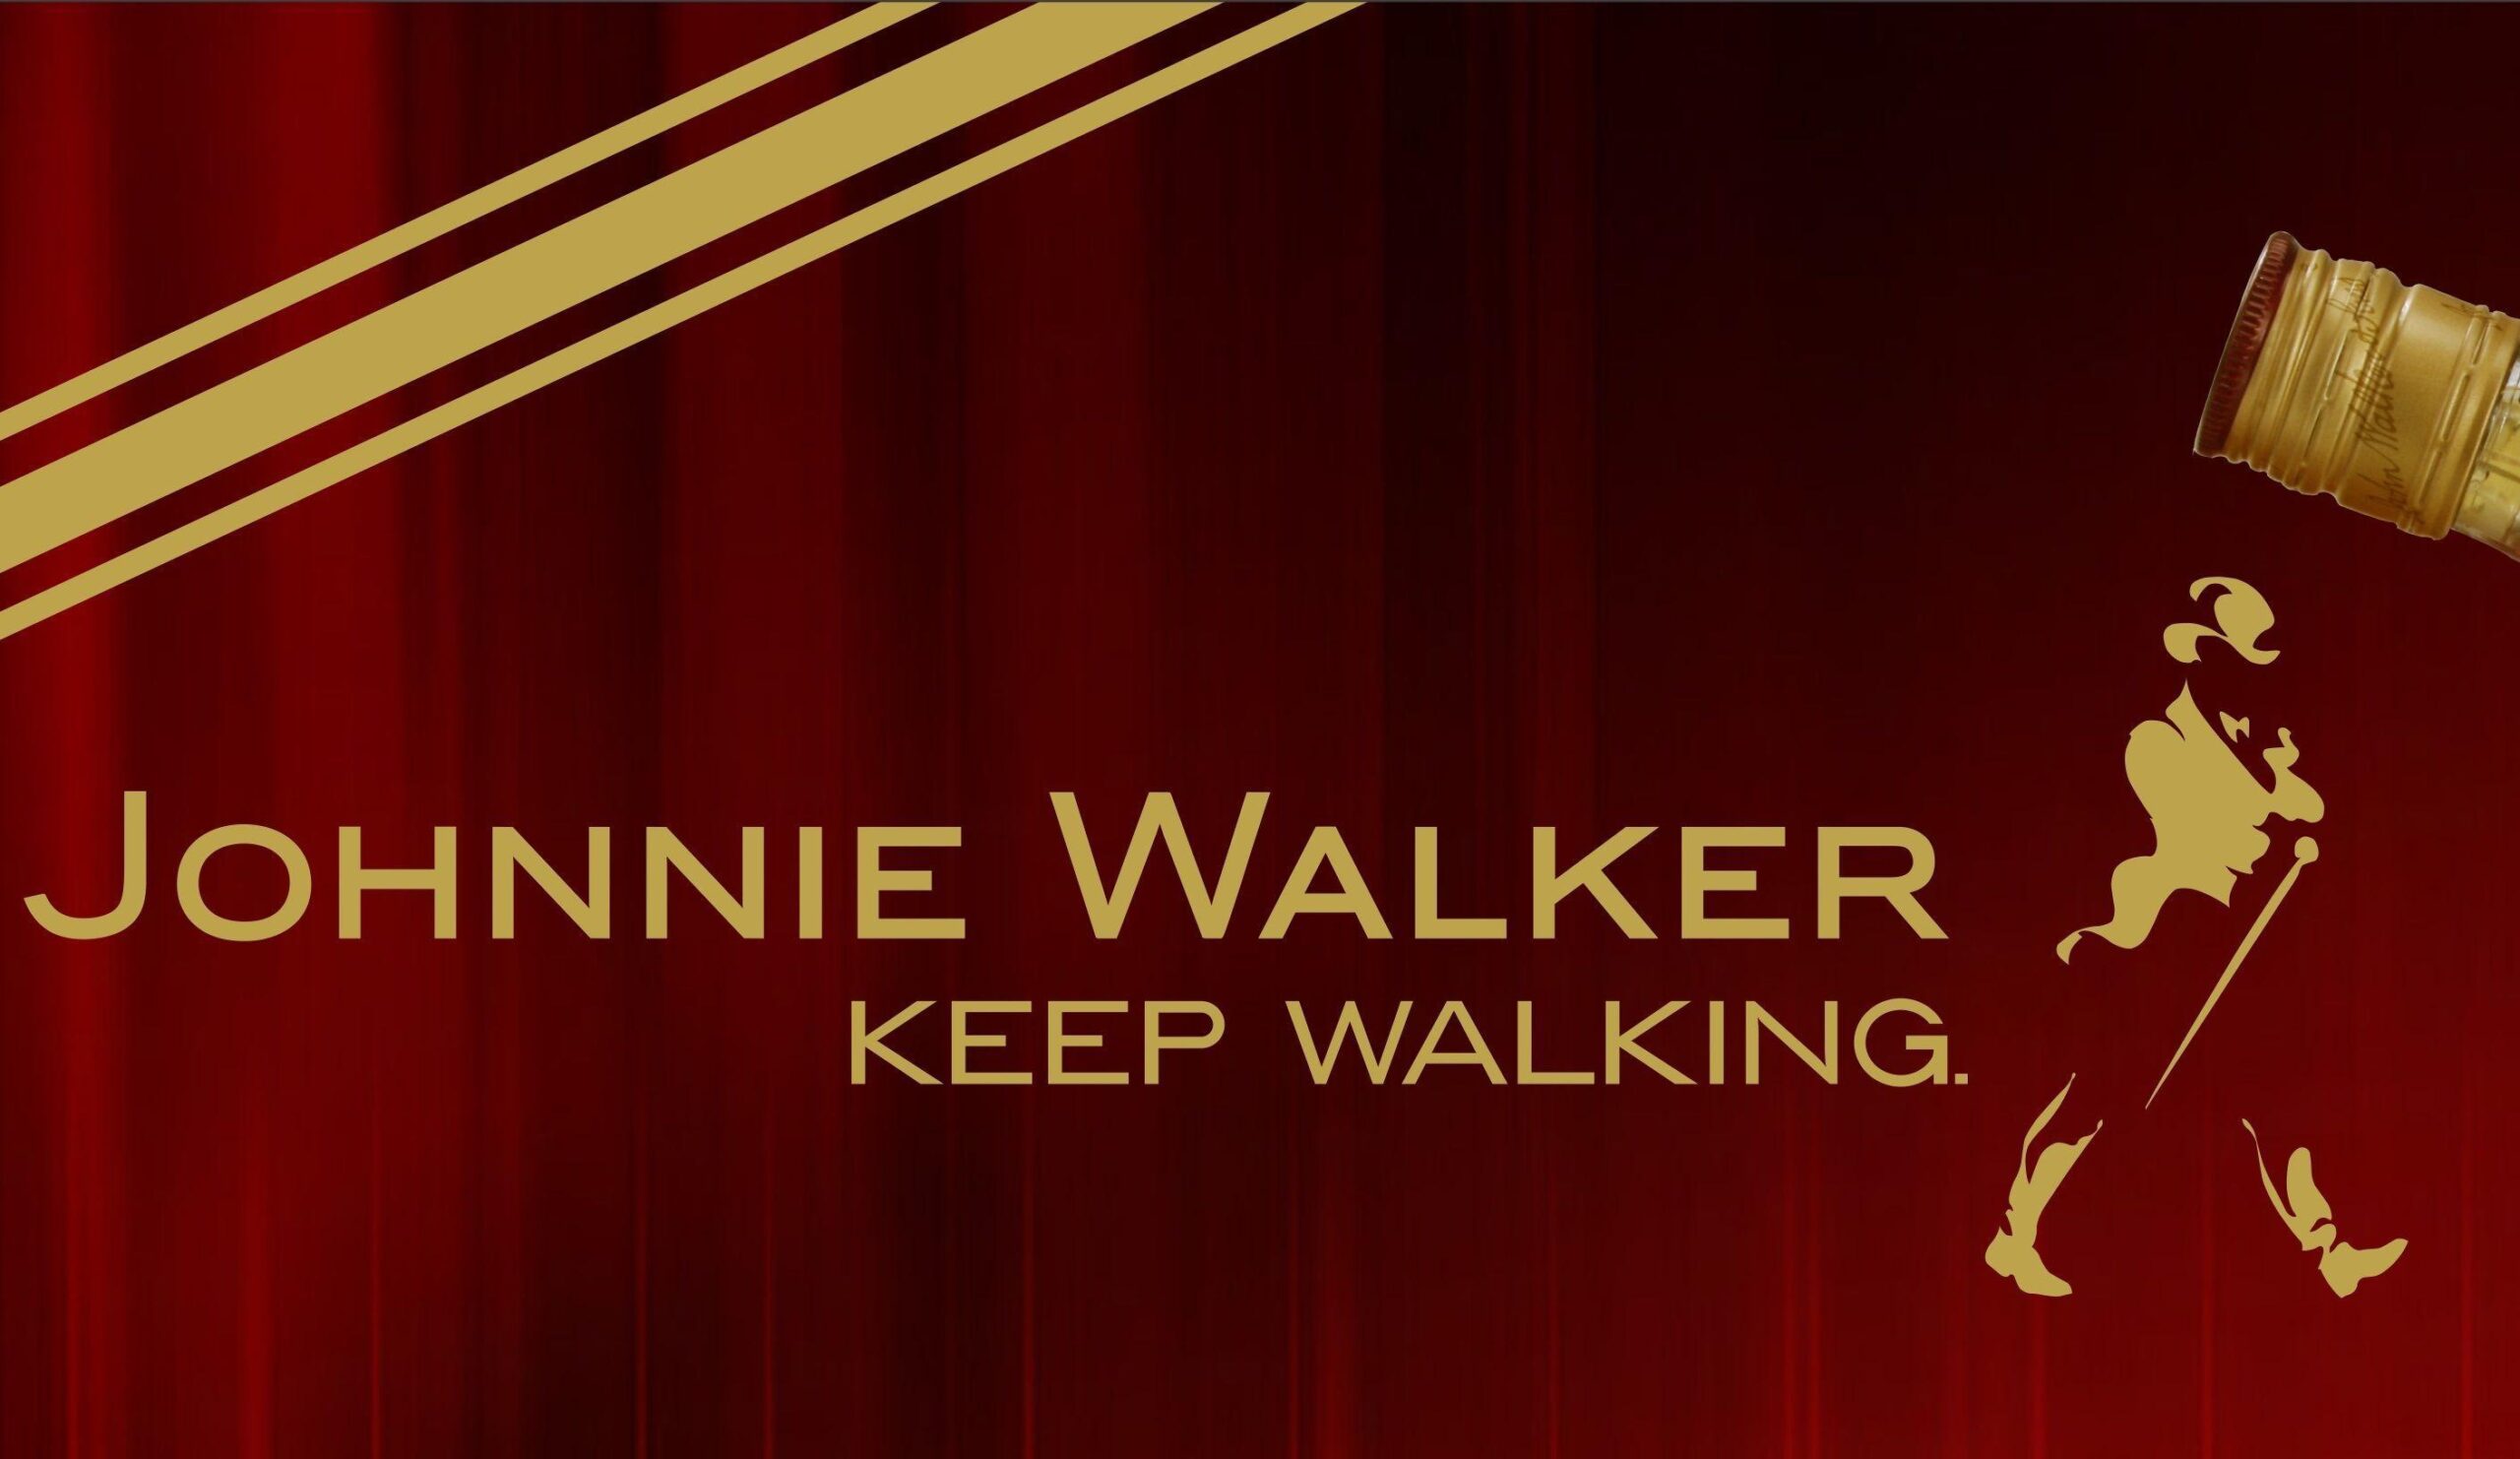 Johnnie Walker Hd Wallpapers For Pc, Johnnie Walker, Other